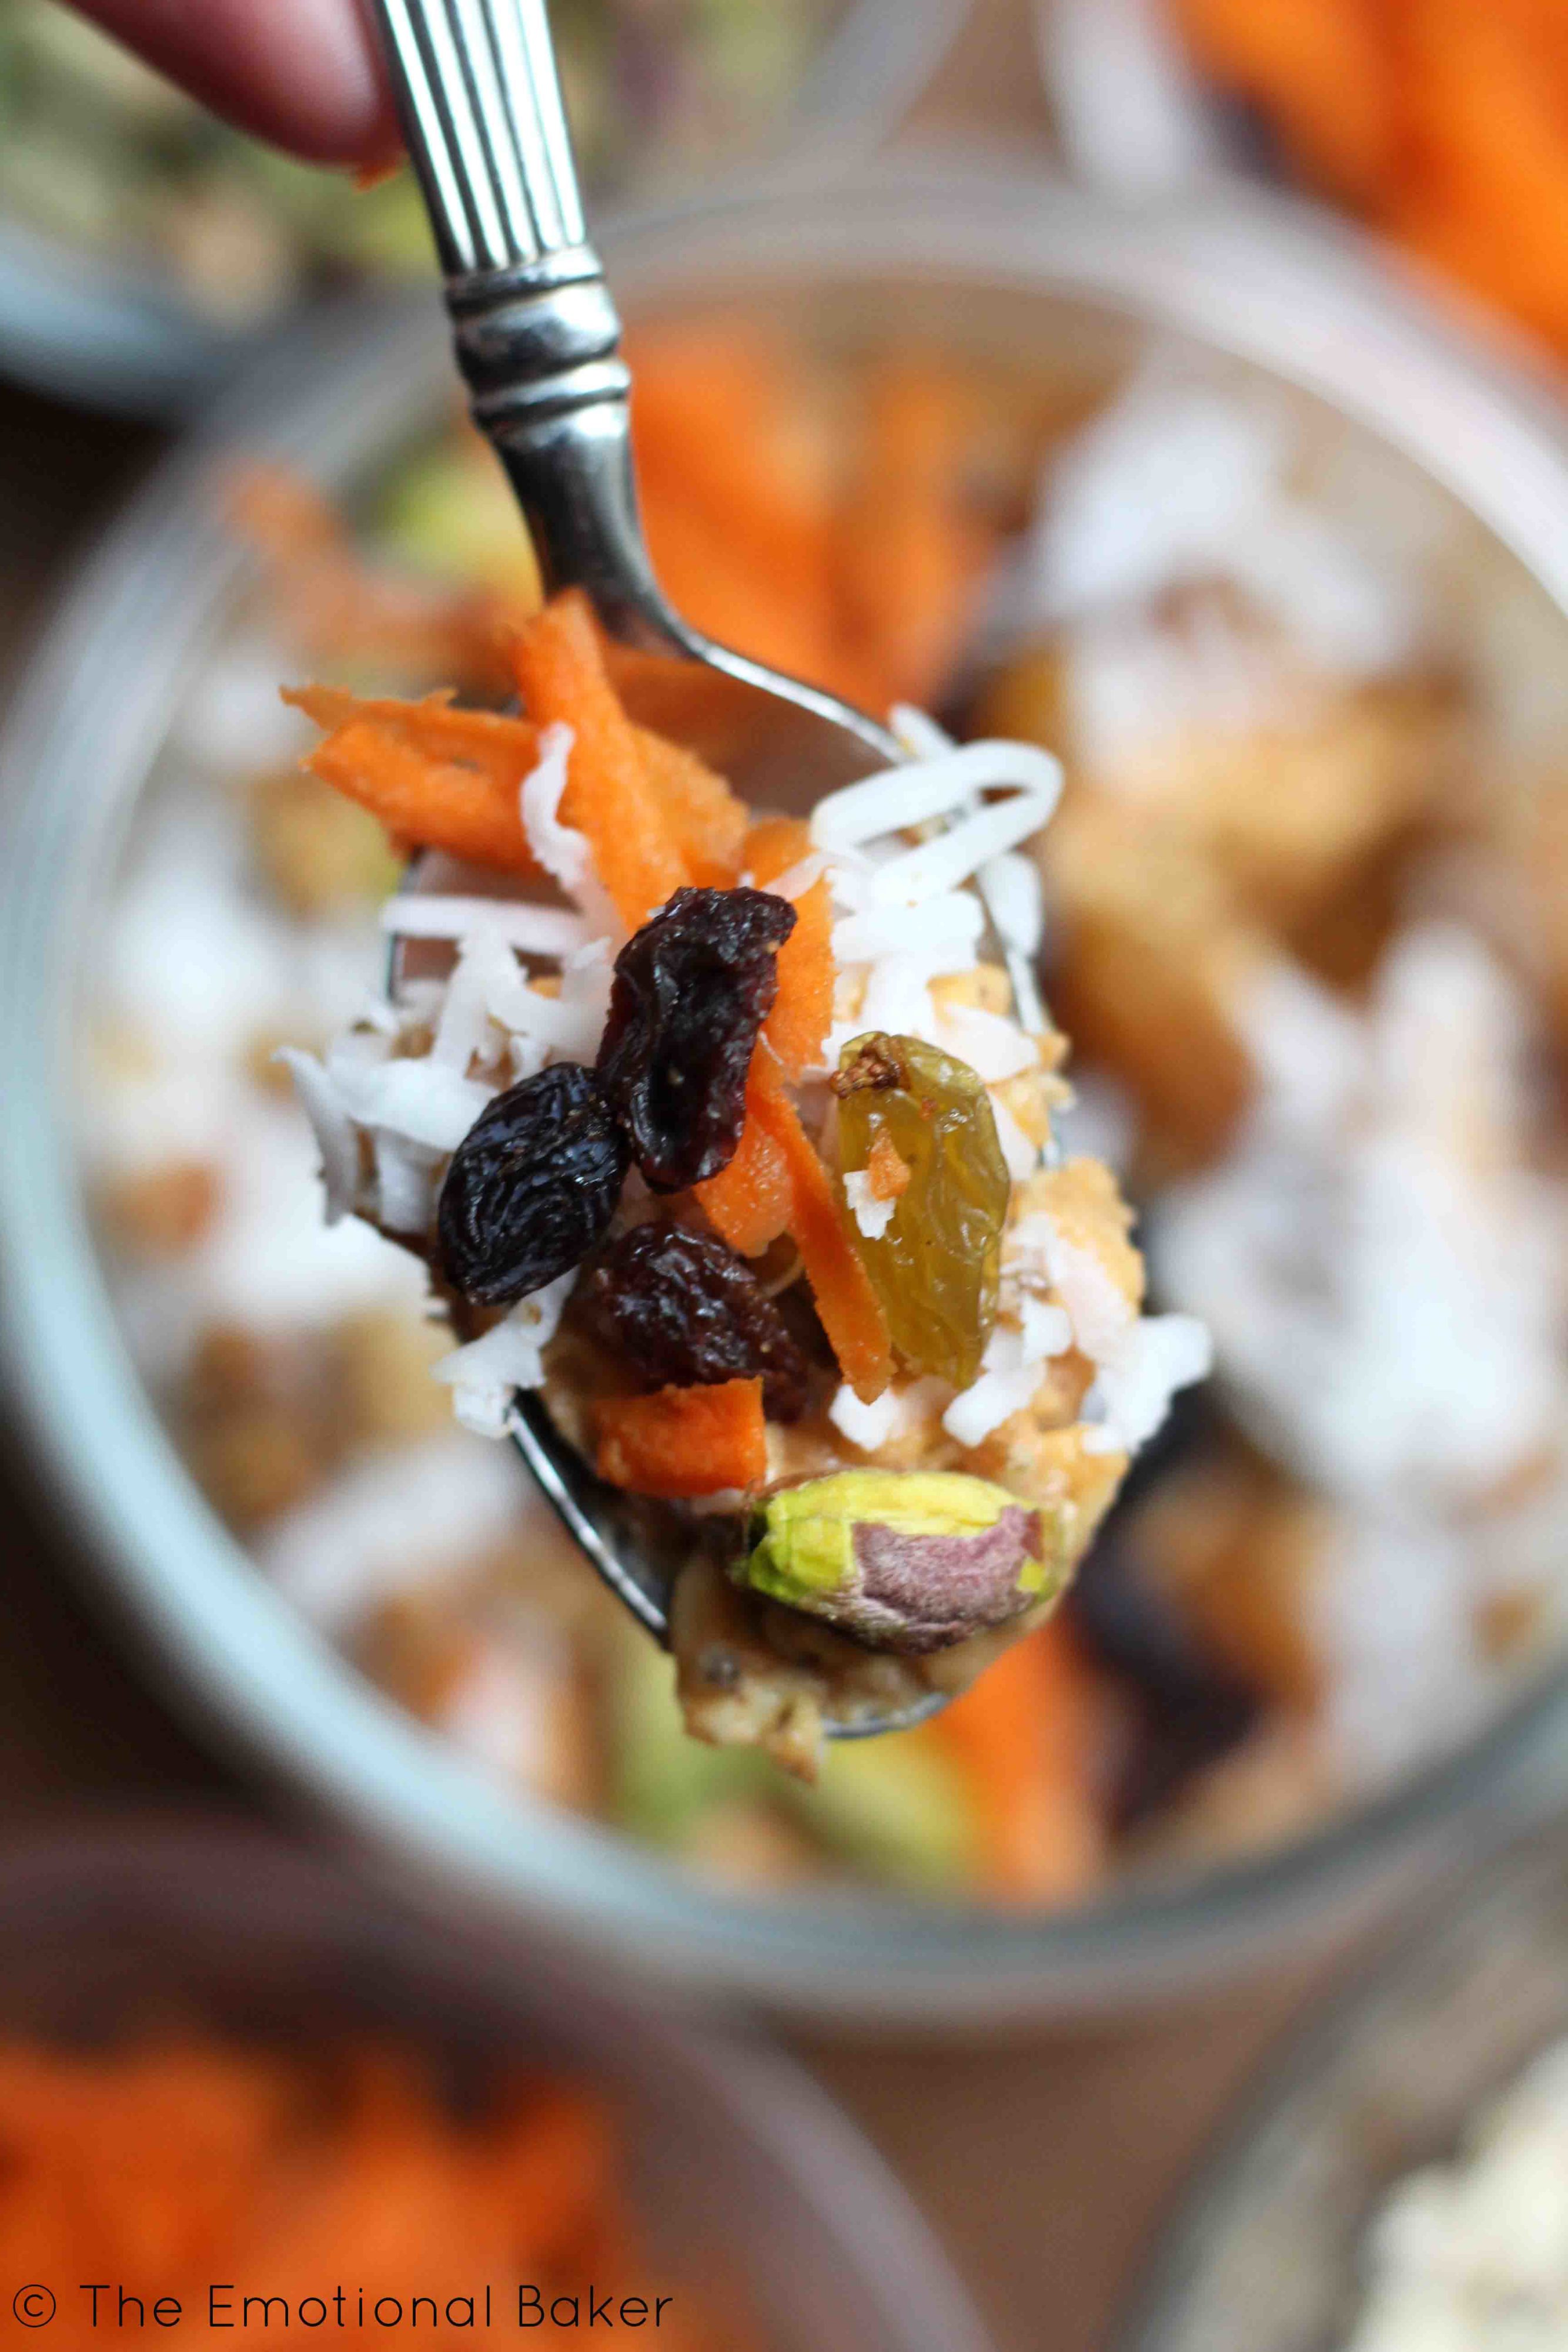 Carrot Cake for breakfast? Yes, Please! These overnight oats are bursting with flavor and will energize your mornings.